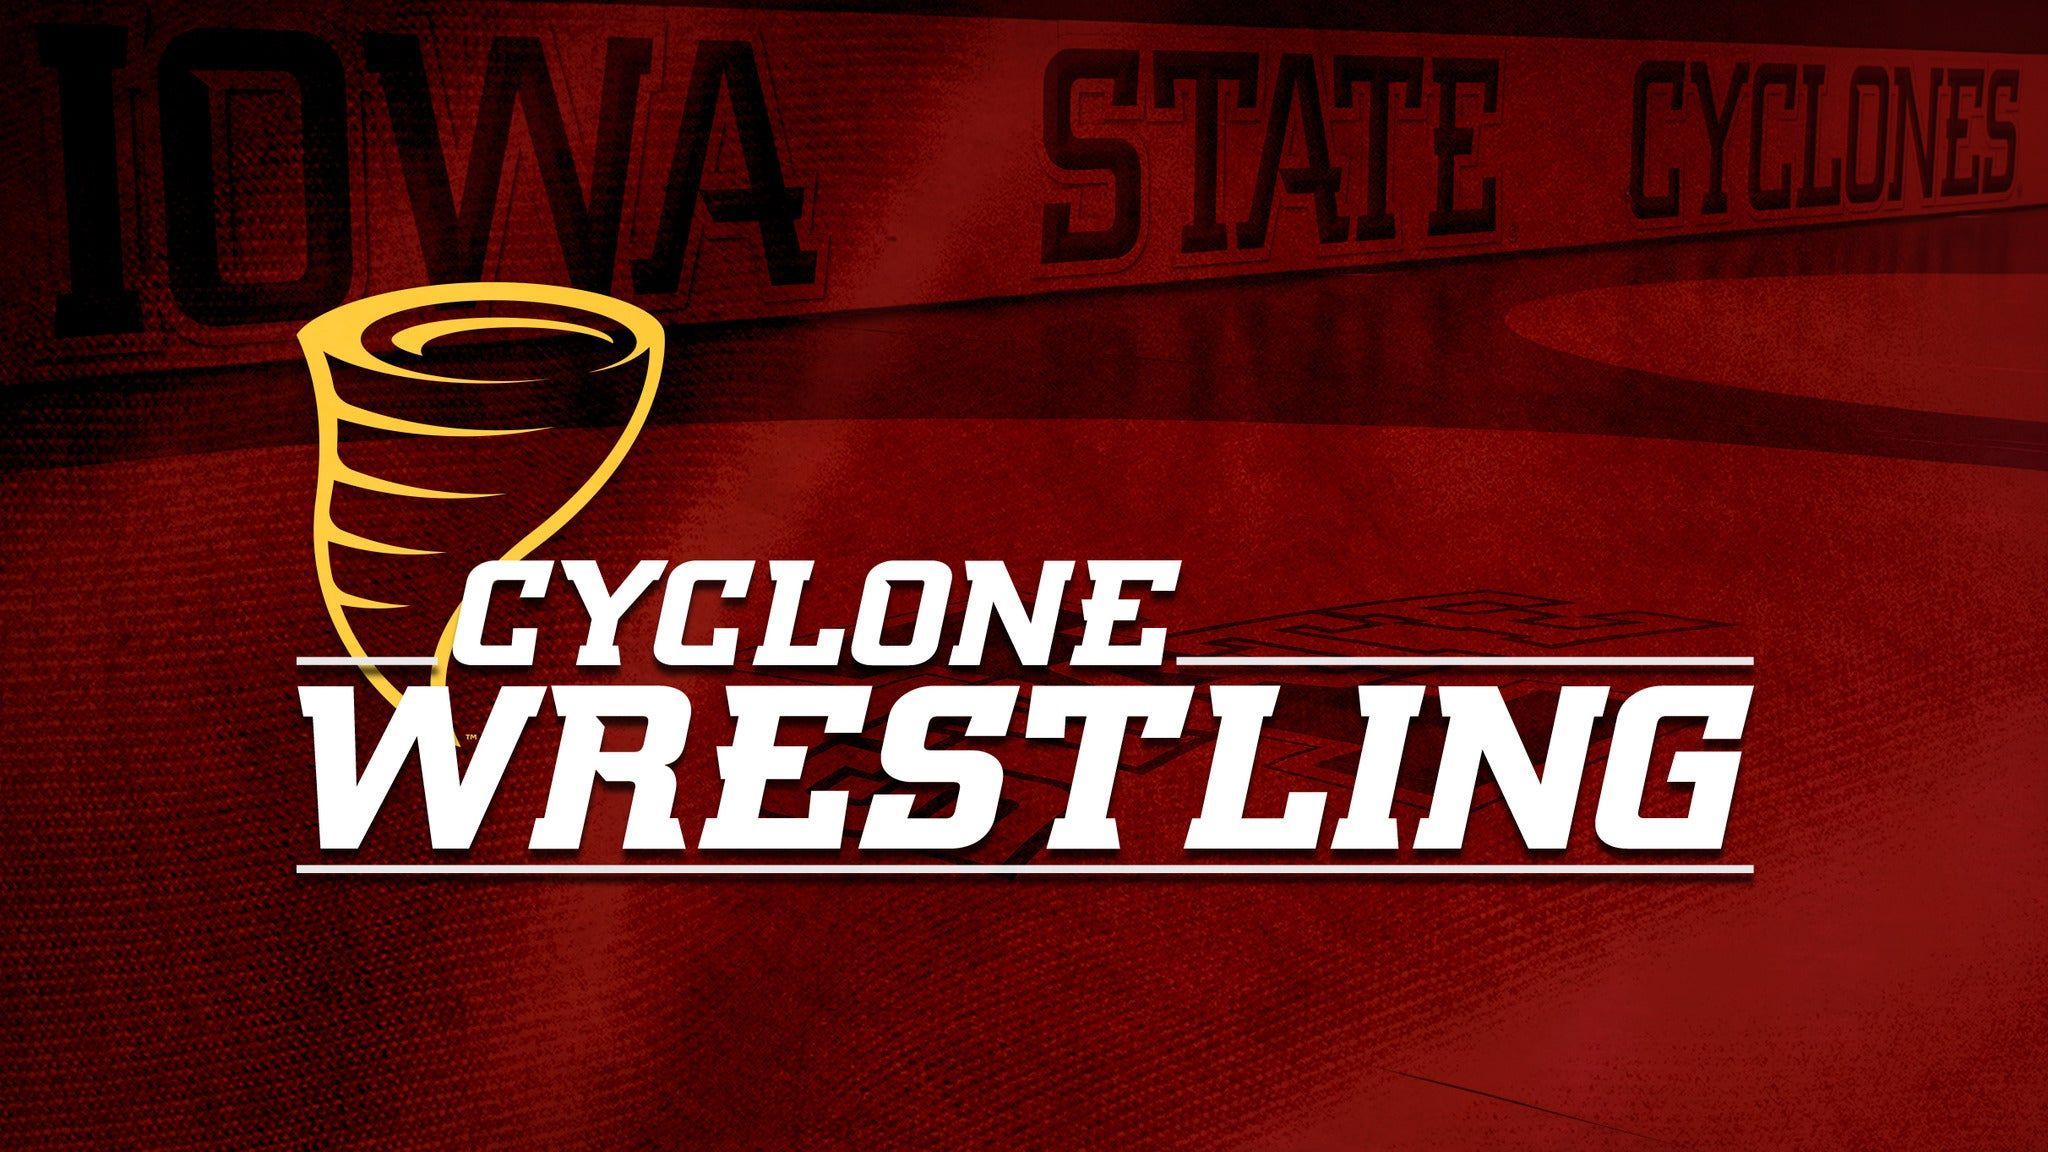 Iowa State Cyclones Wrestling vs. University of Oklahoma Wrestling Tickets Friday, January 2019 7:00 PM at Iowa State Cyclones